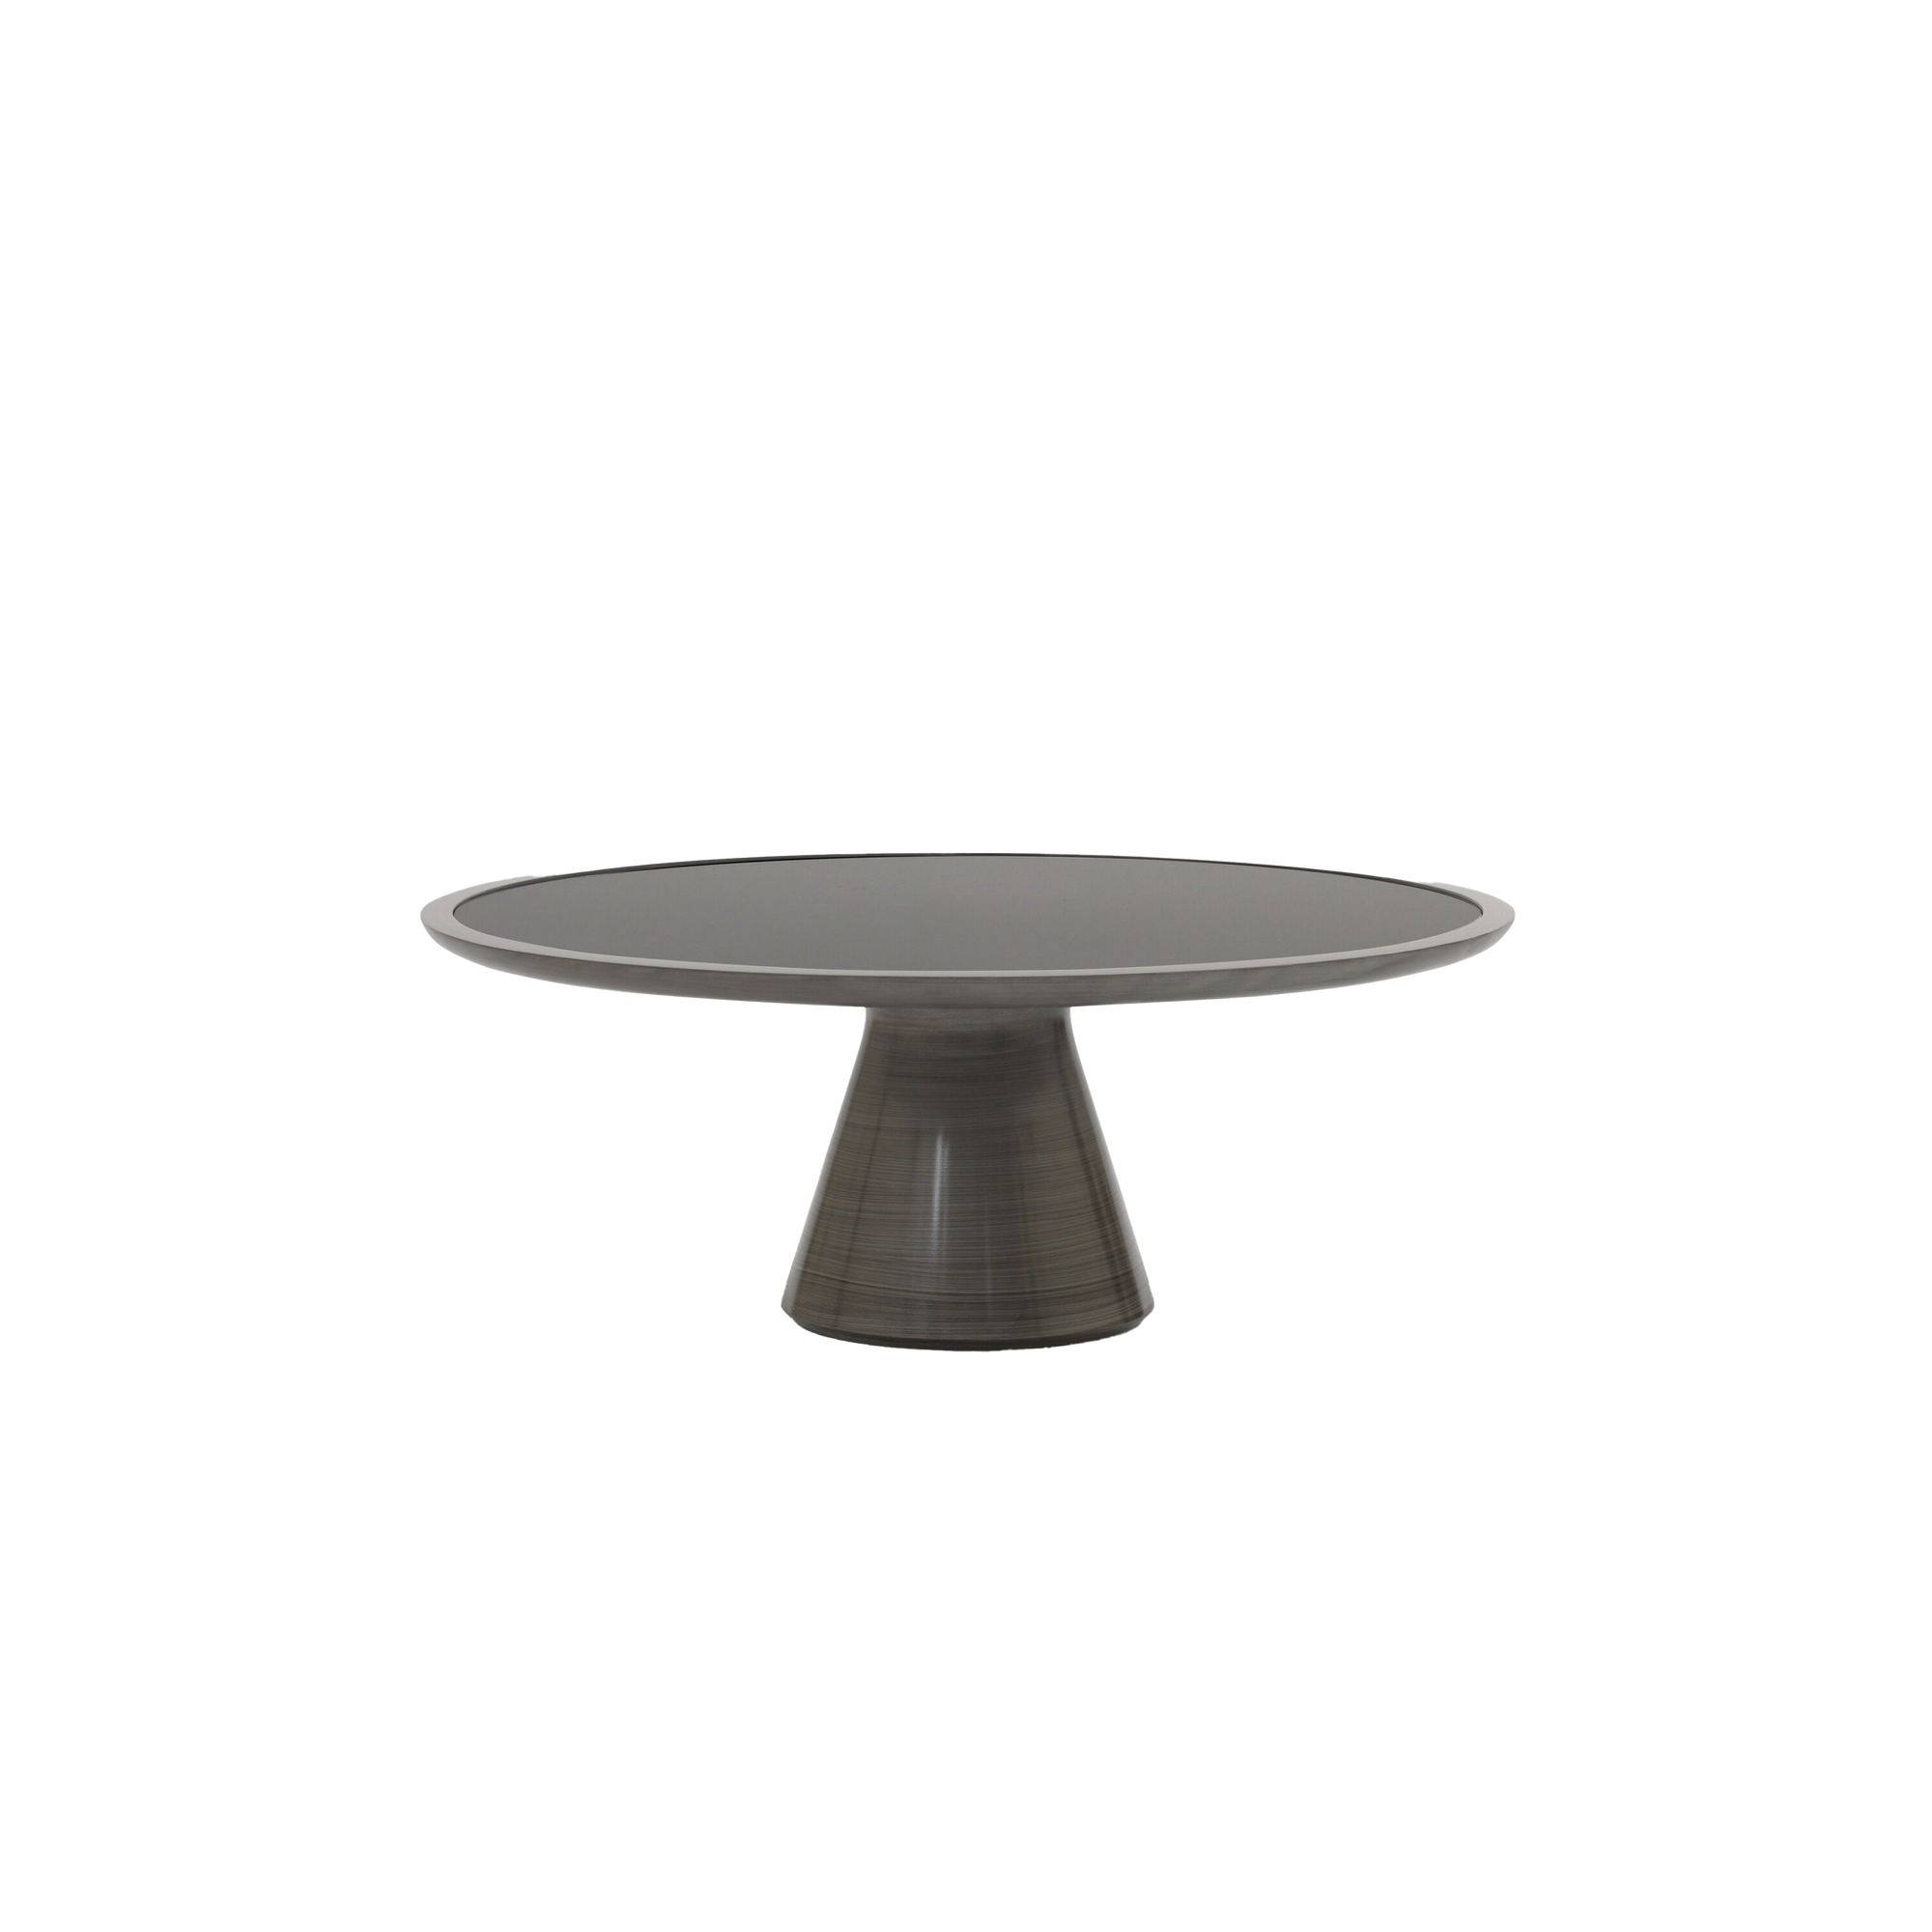 Simply elegant, the Taper Coffee Table is a chic sculptural centerpiece.